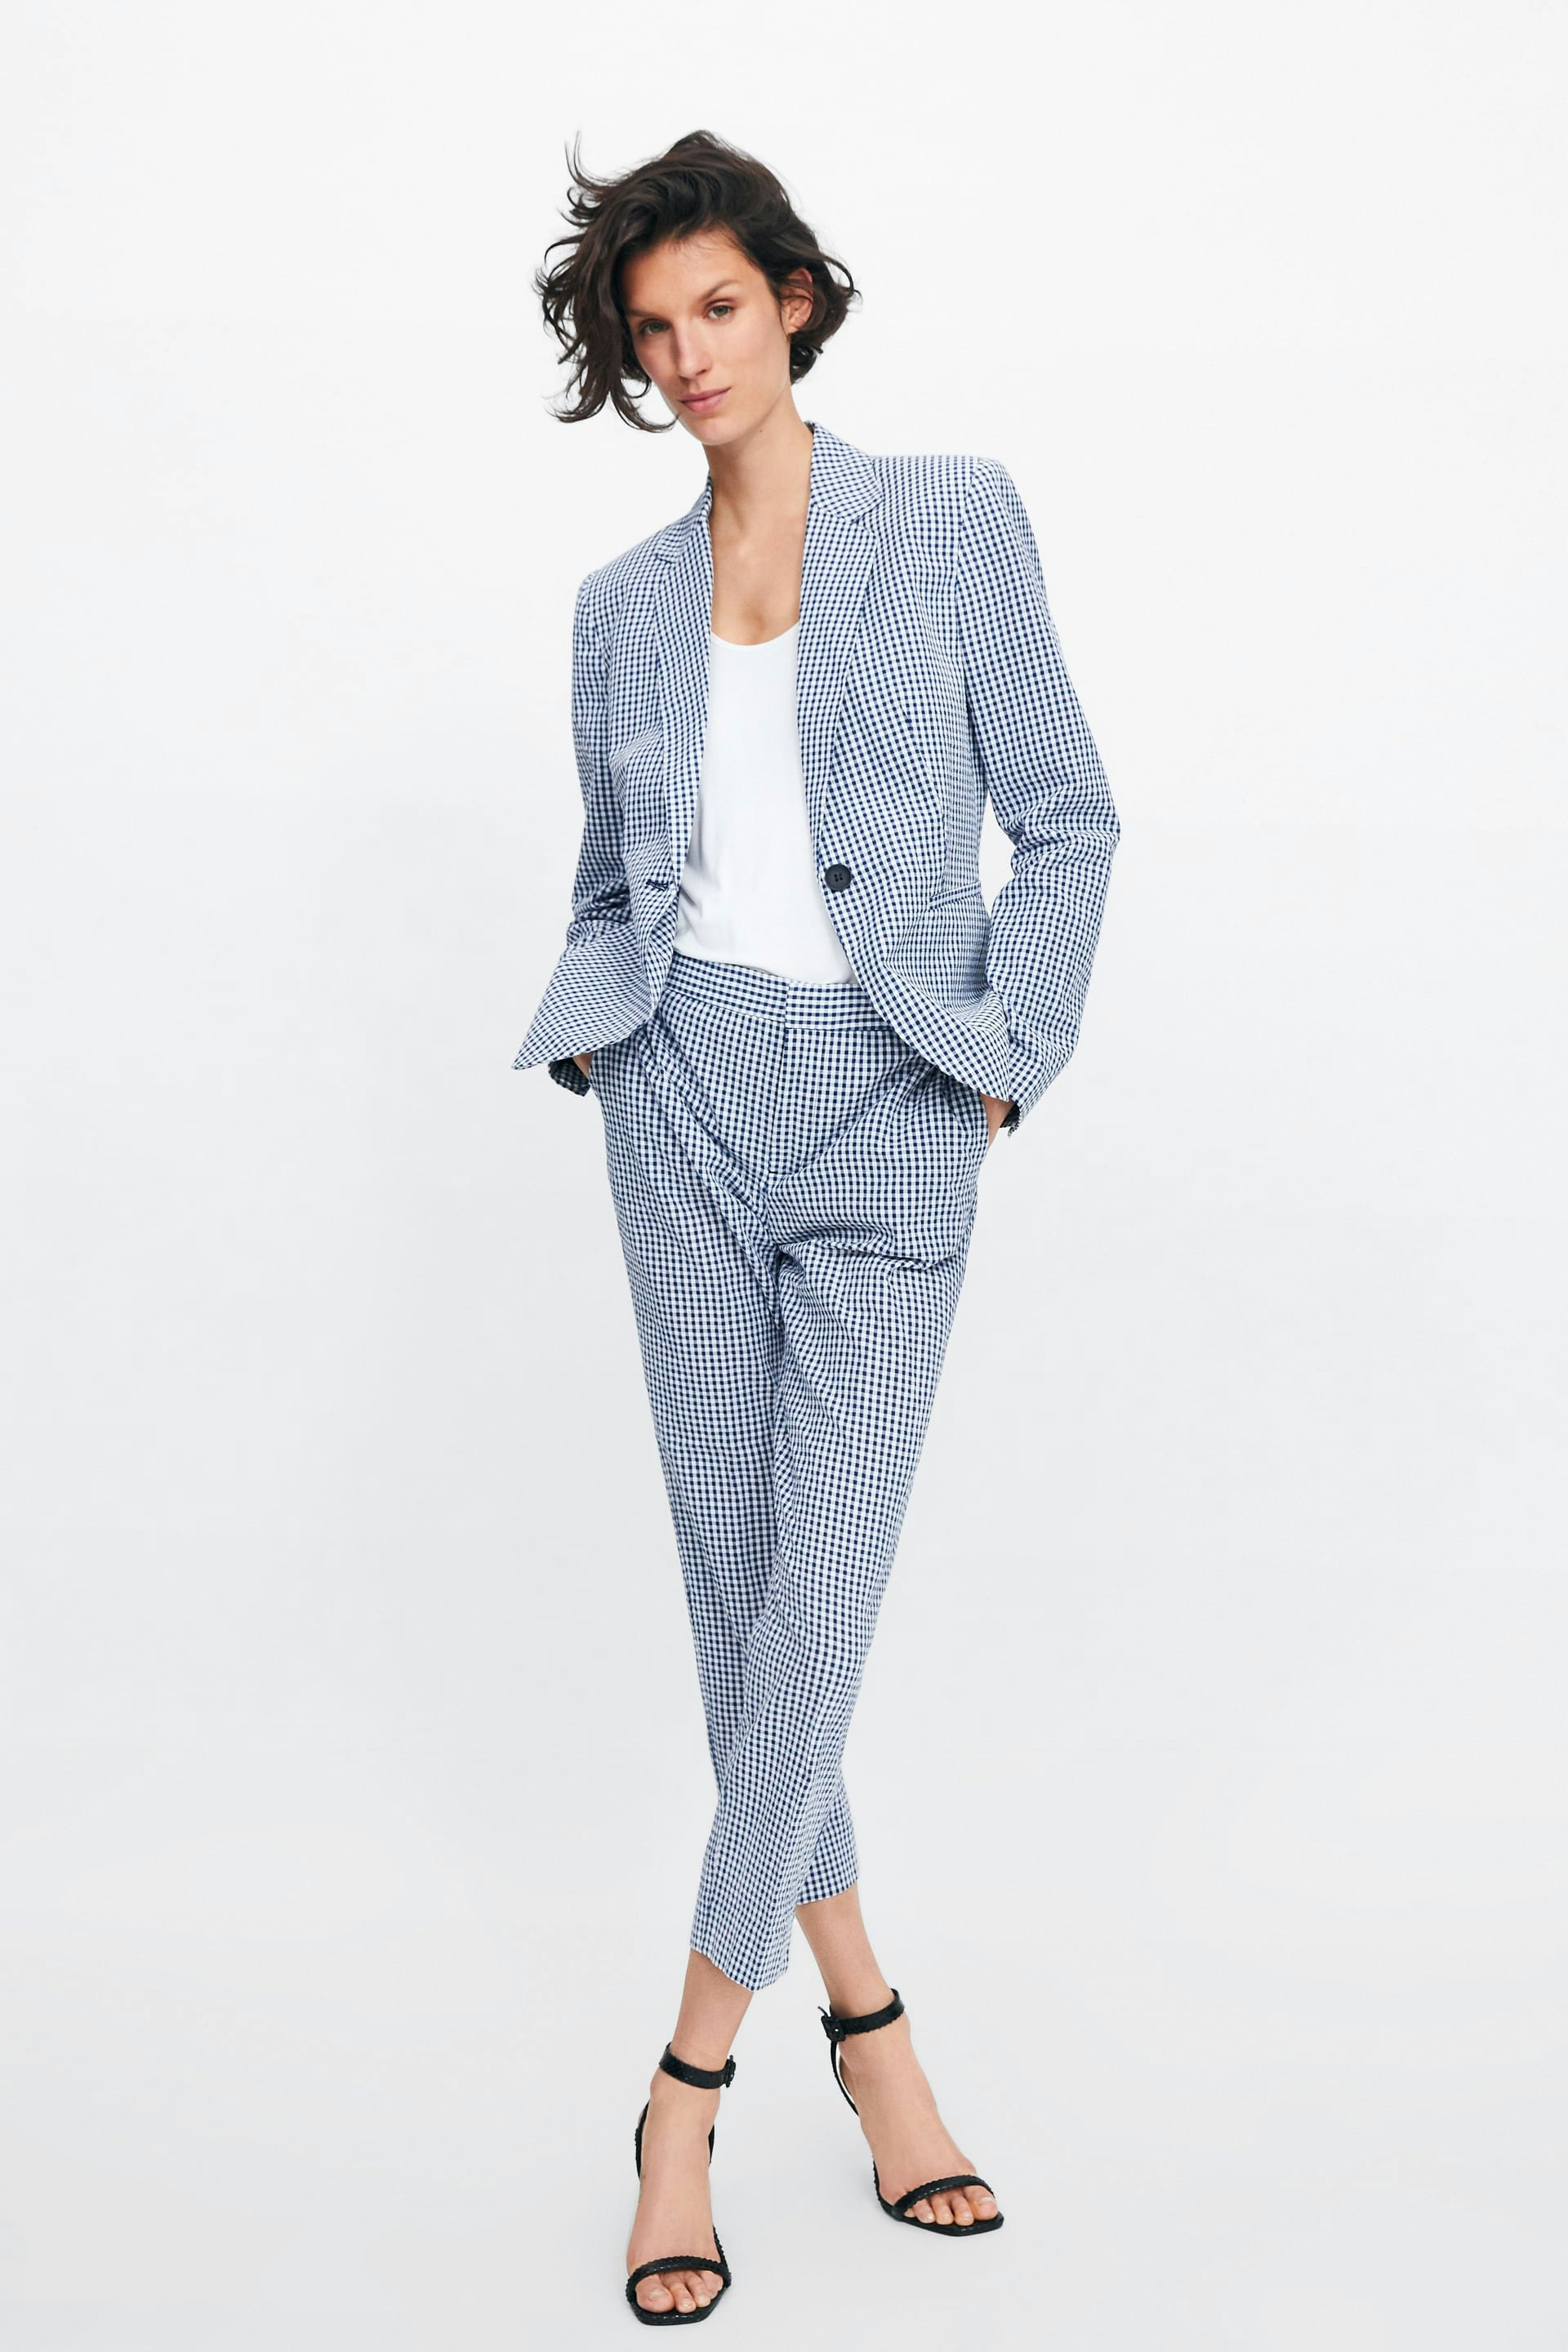 pant outfits to wear to a wedding